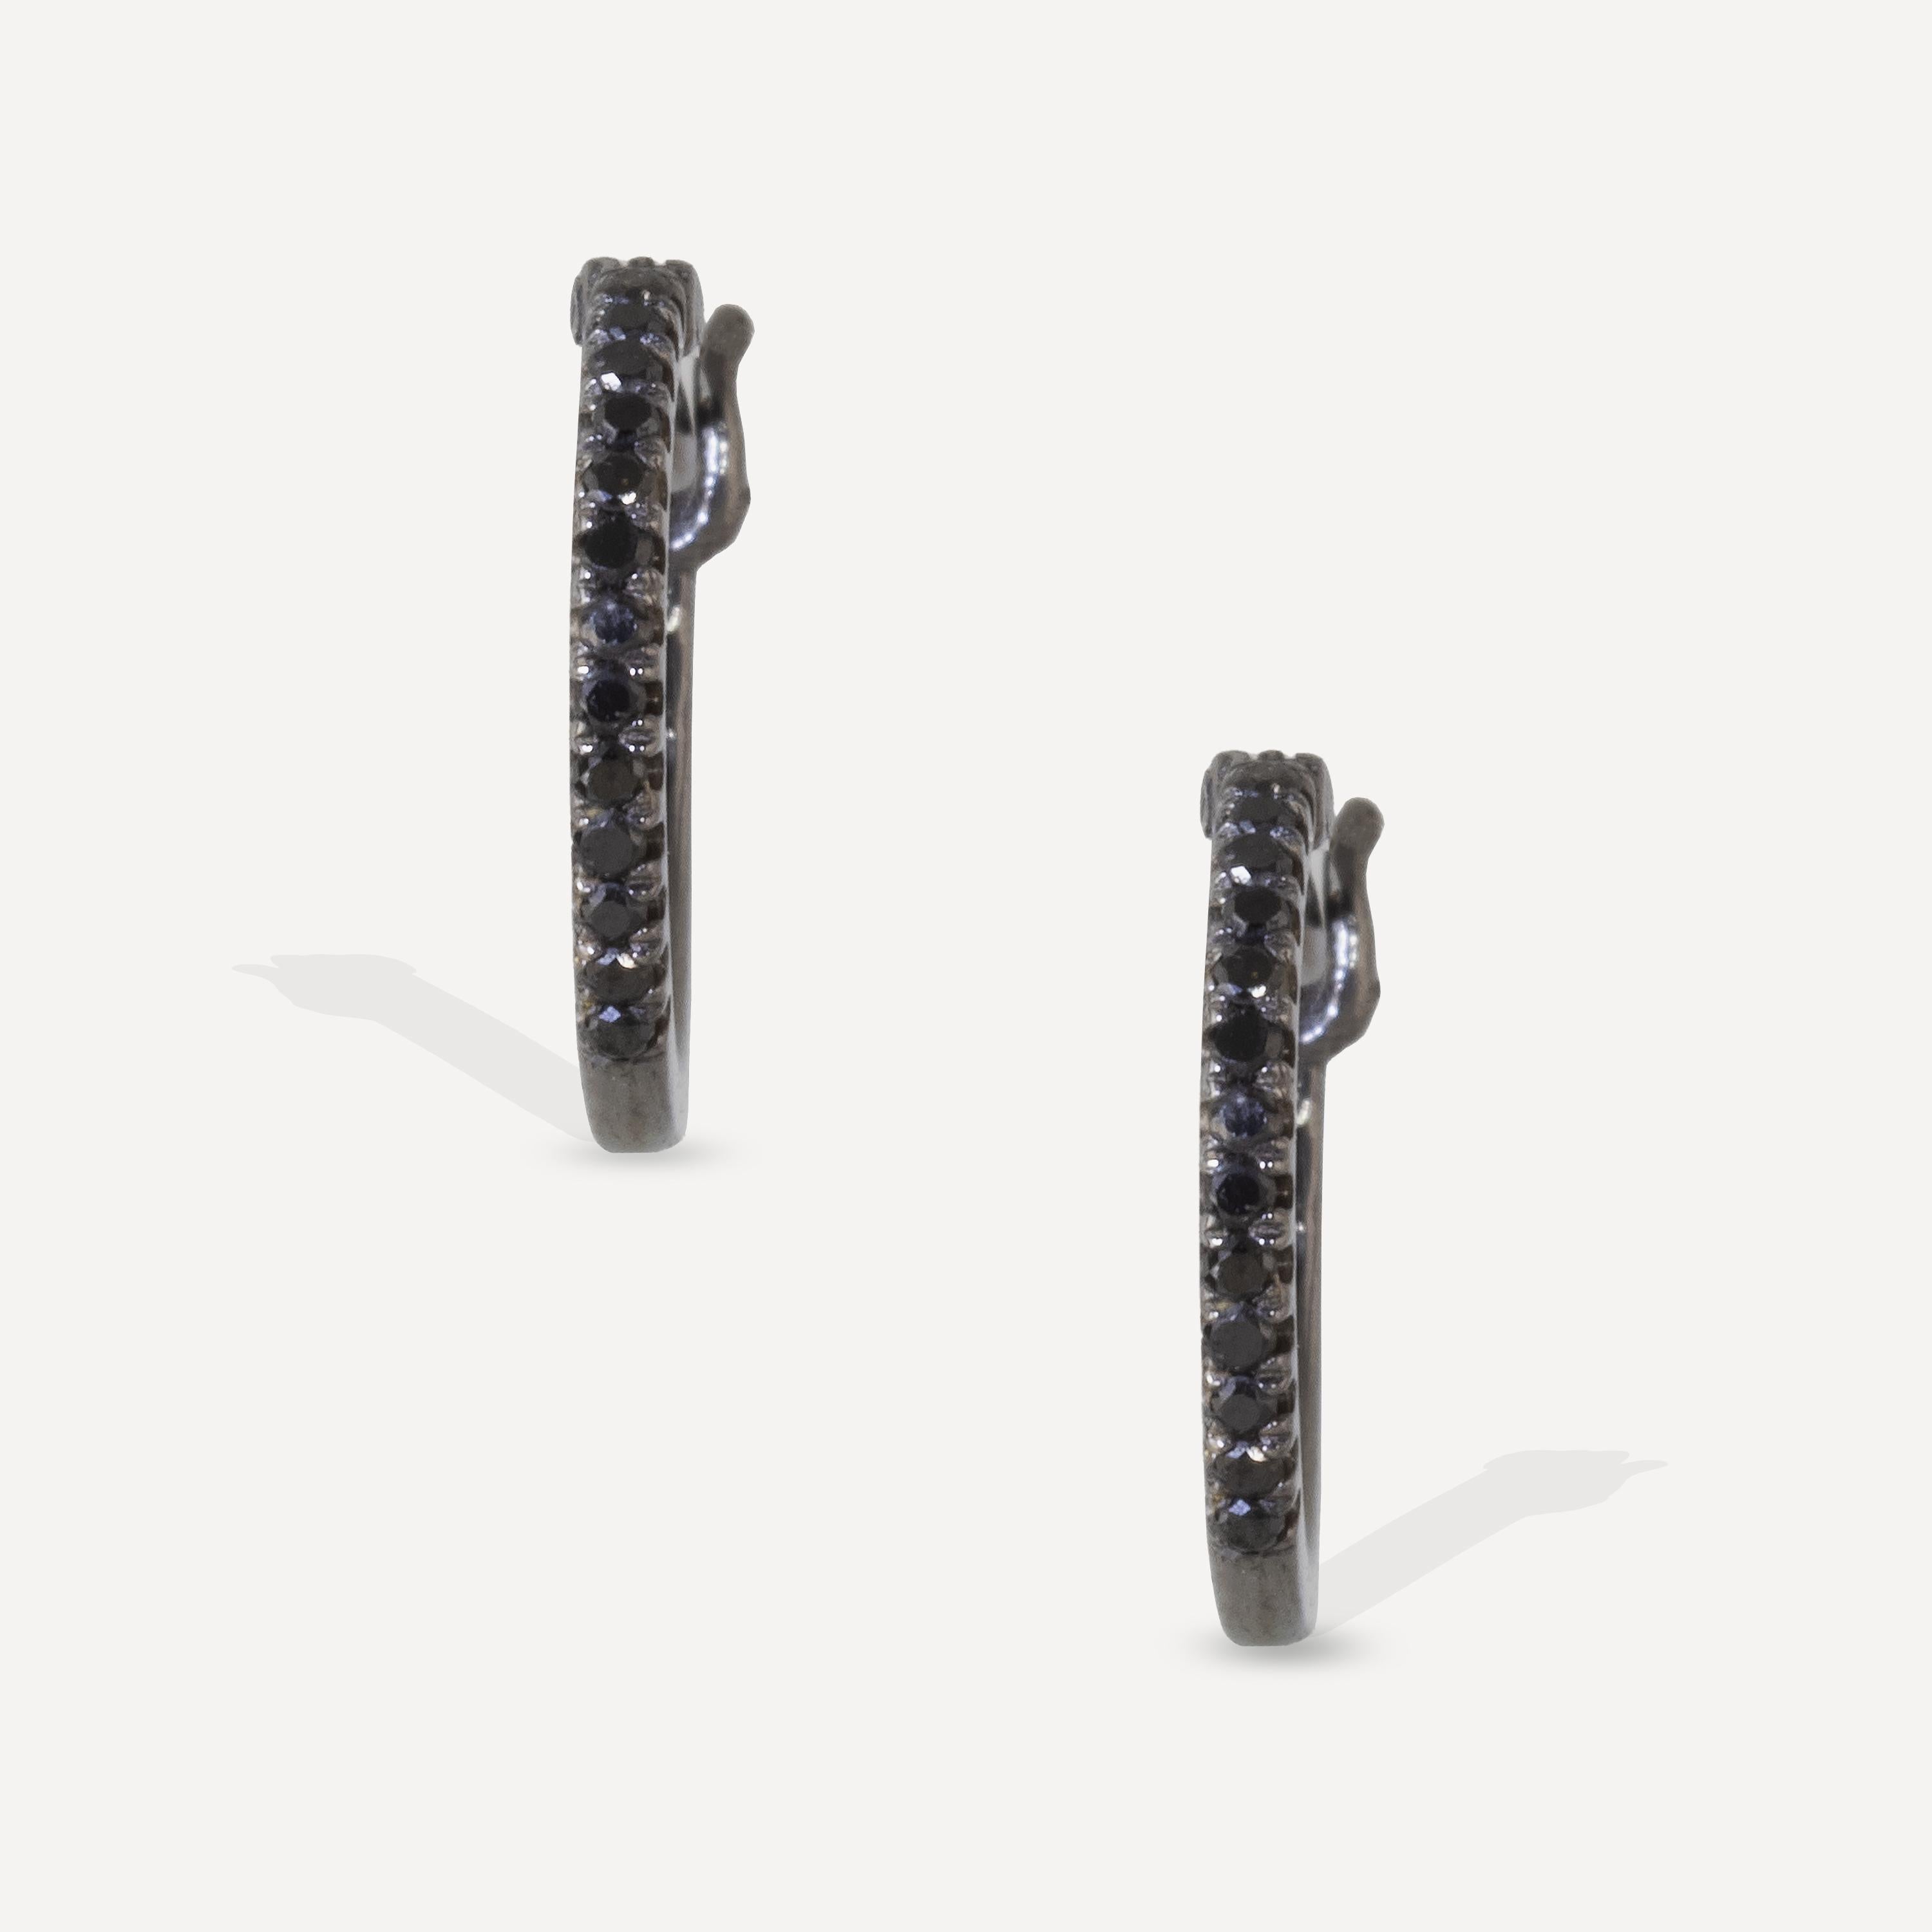 From the essentials collection, these black diamond hoops feature 26 black diamonds set in 18k blackened gold, with 14k posts.
Black diamonds are  used for protection and to absorb and deflect negative energy. The deep black color of these stones is